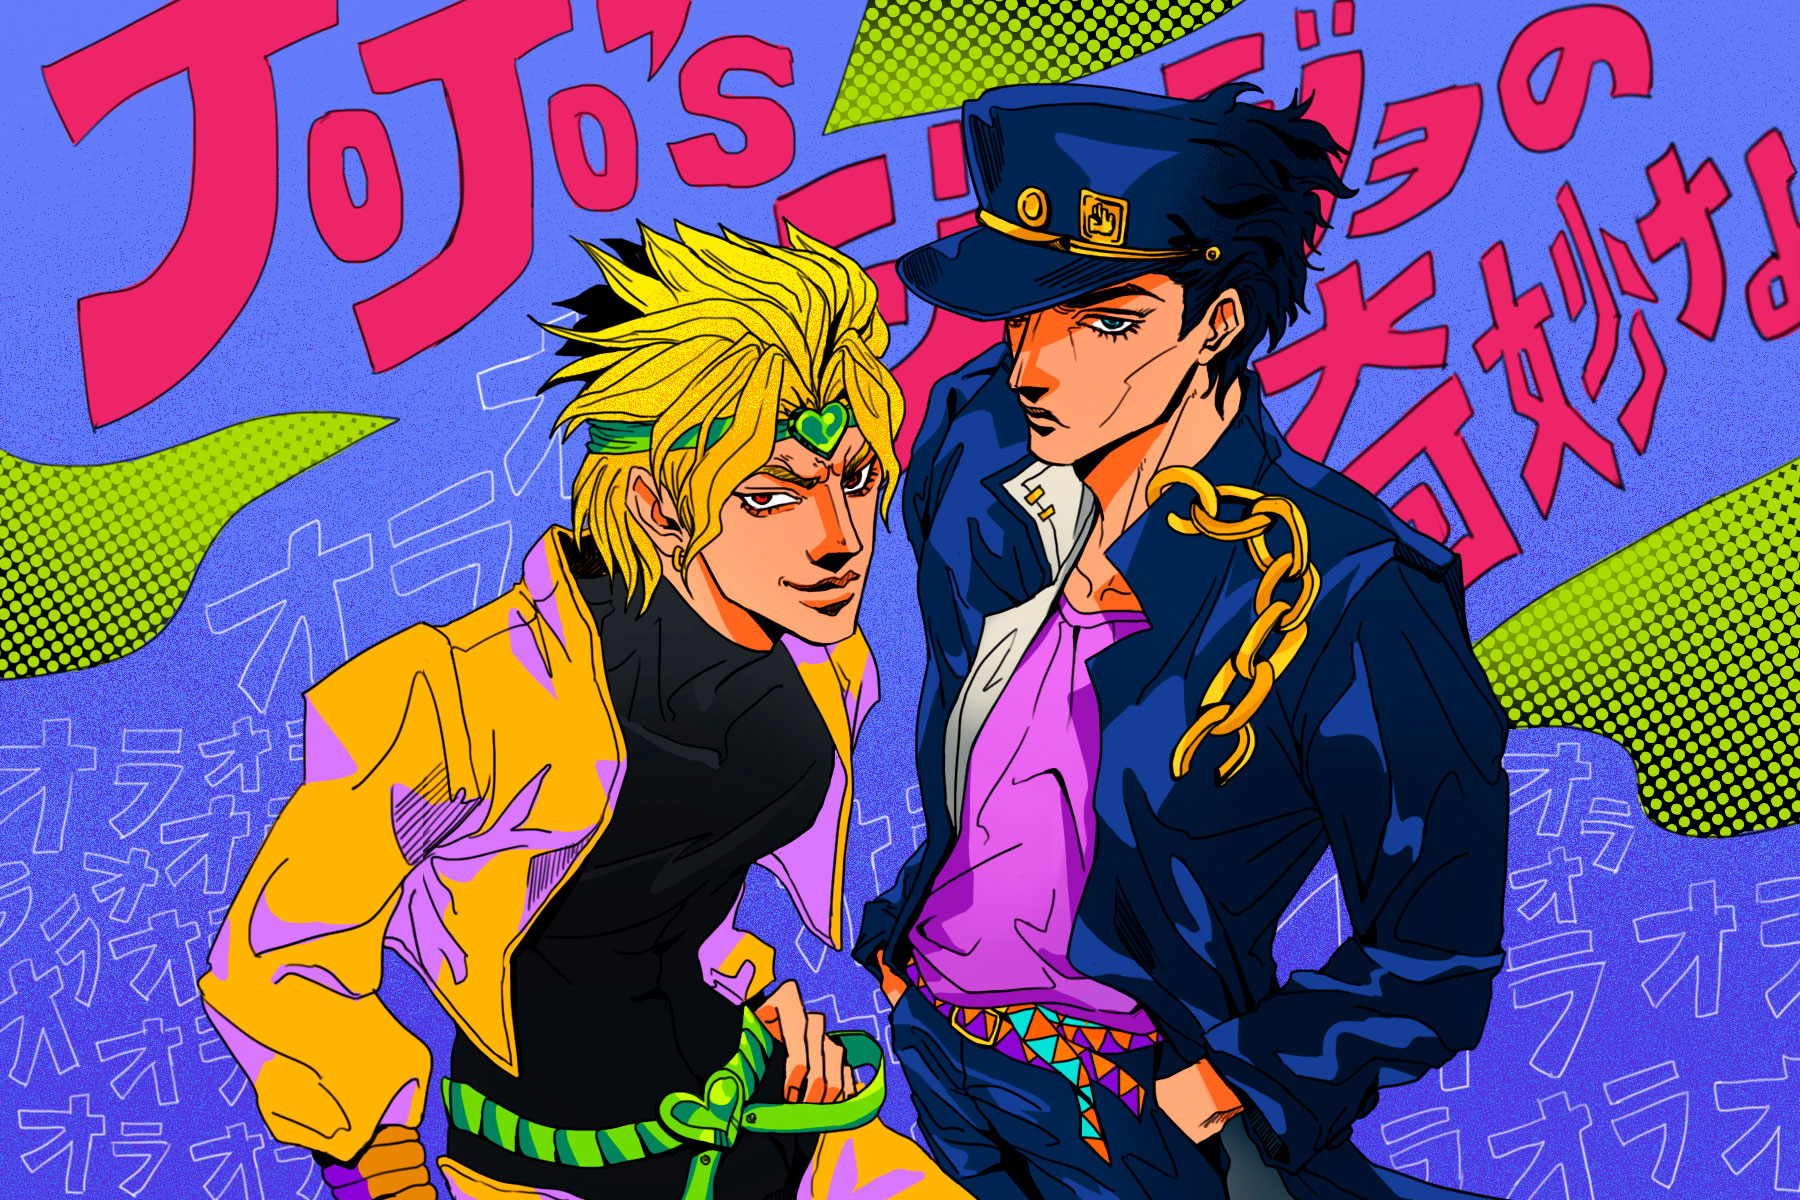 Jojo's Bizarre Adventure' Is the Animated Epic You Should Be Watching